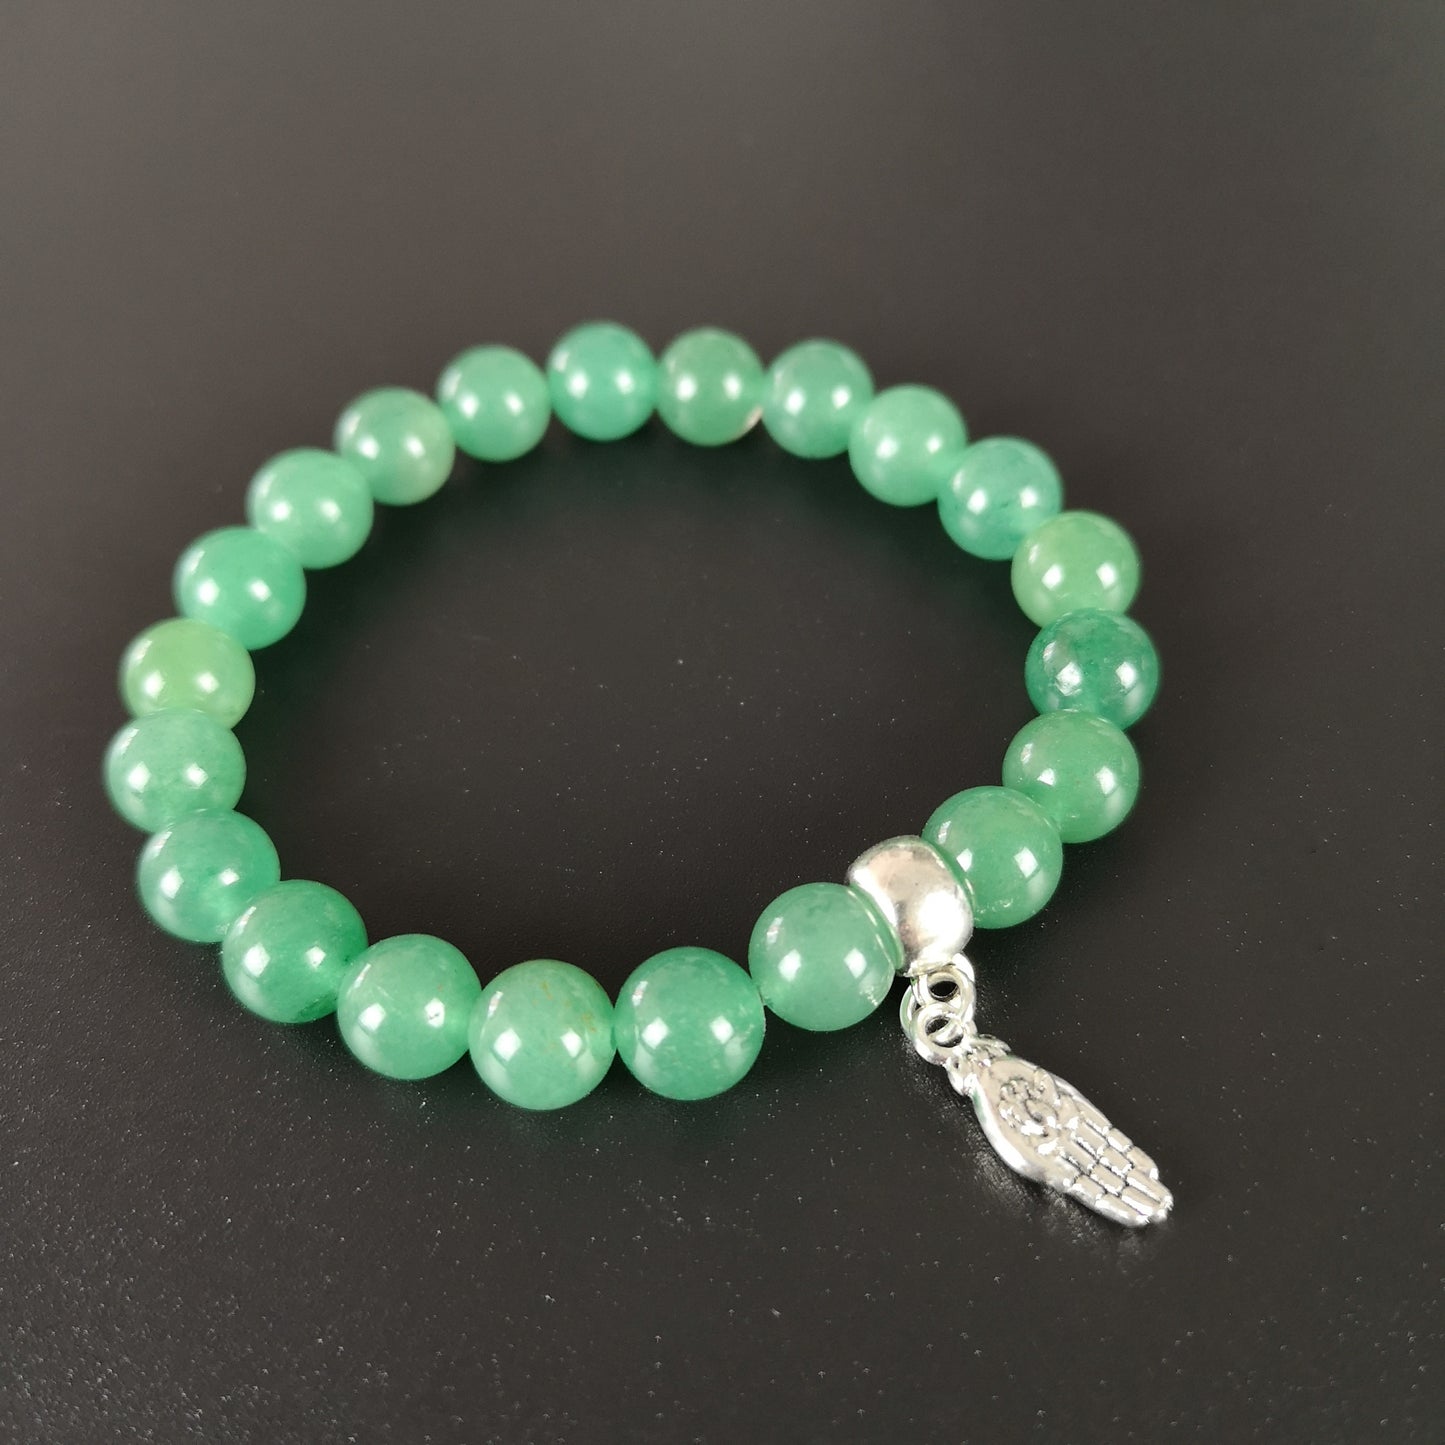 Aventurine mala beaded bracelet with a hand and lotus charm - The French Witch shop